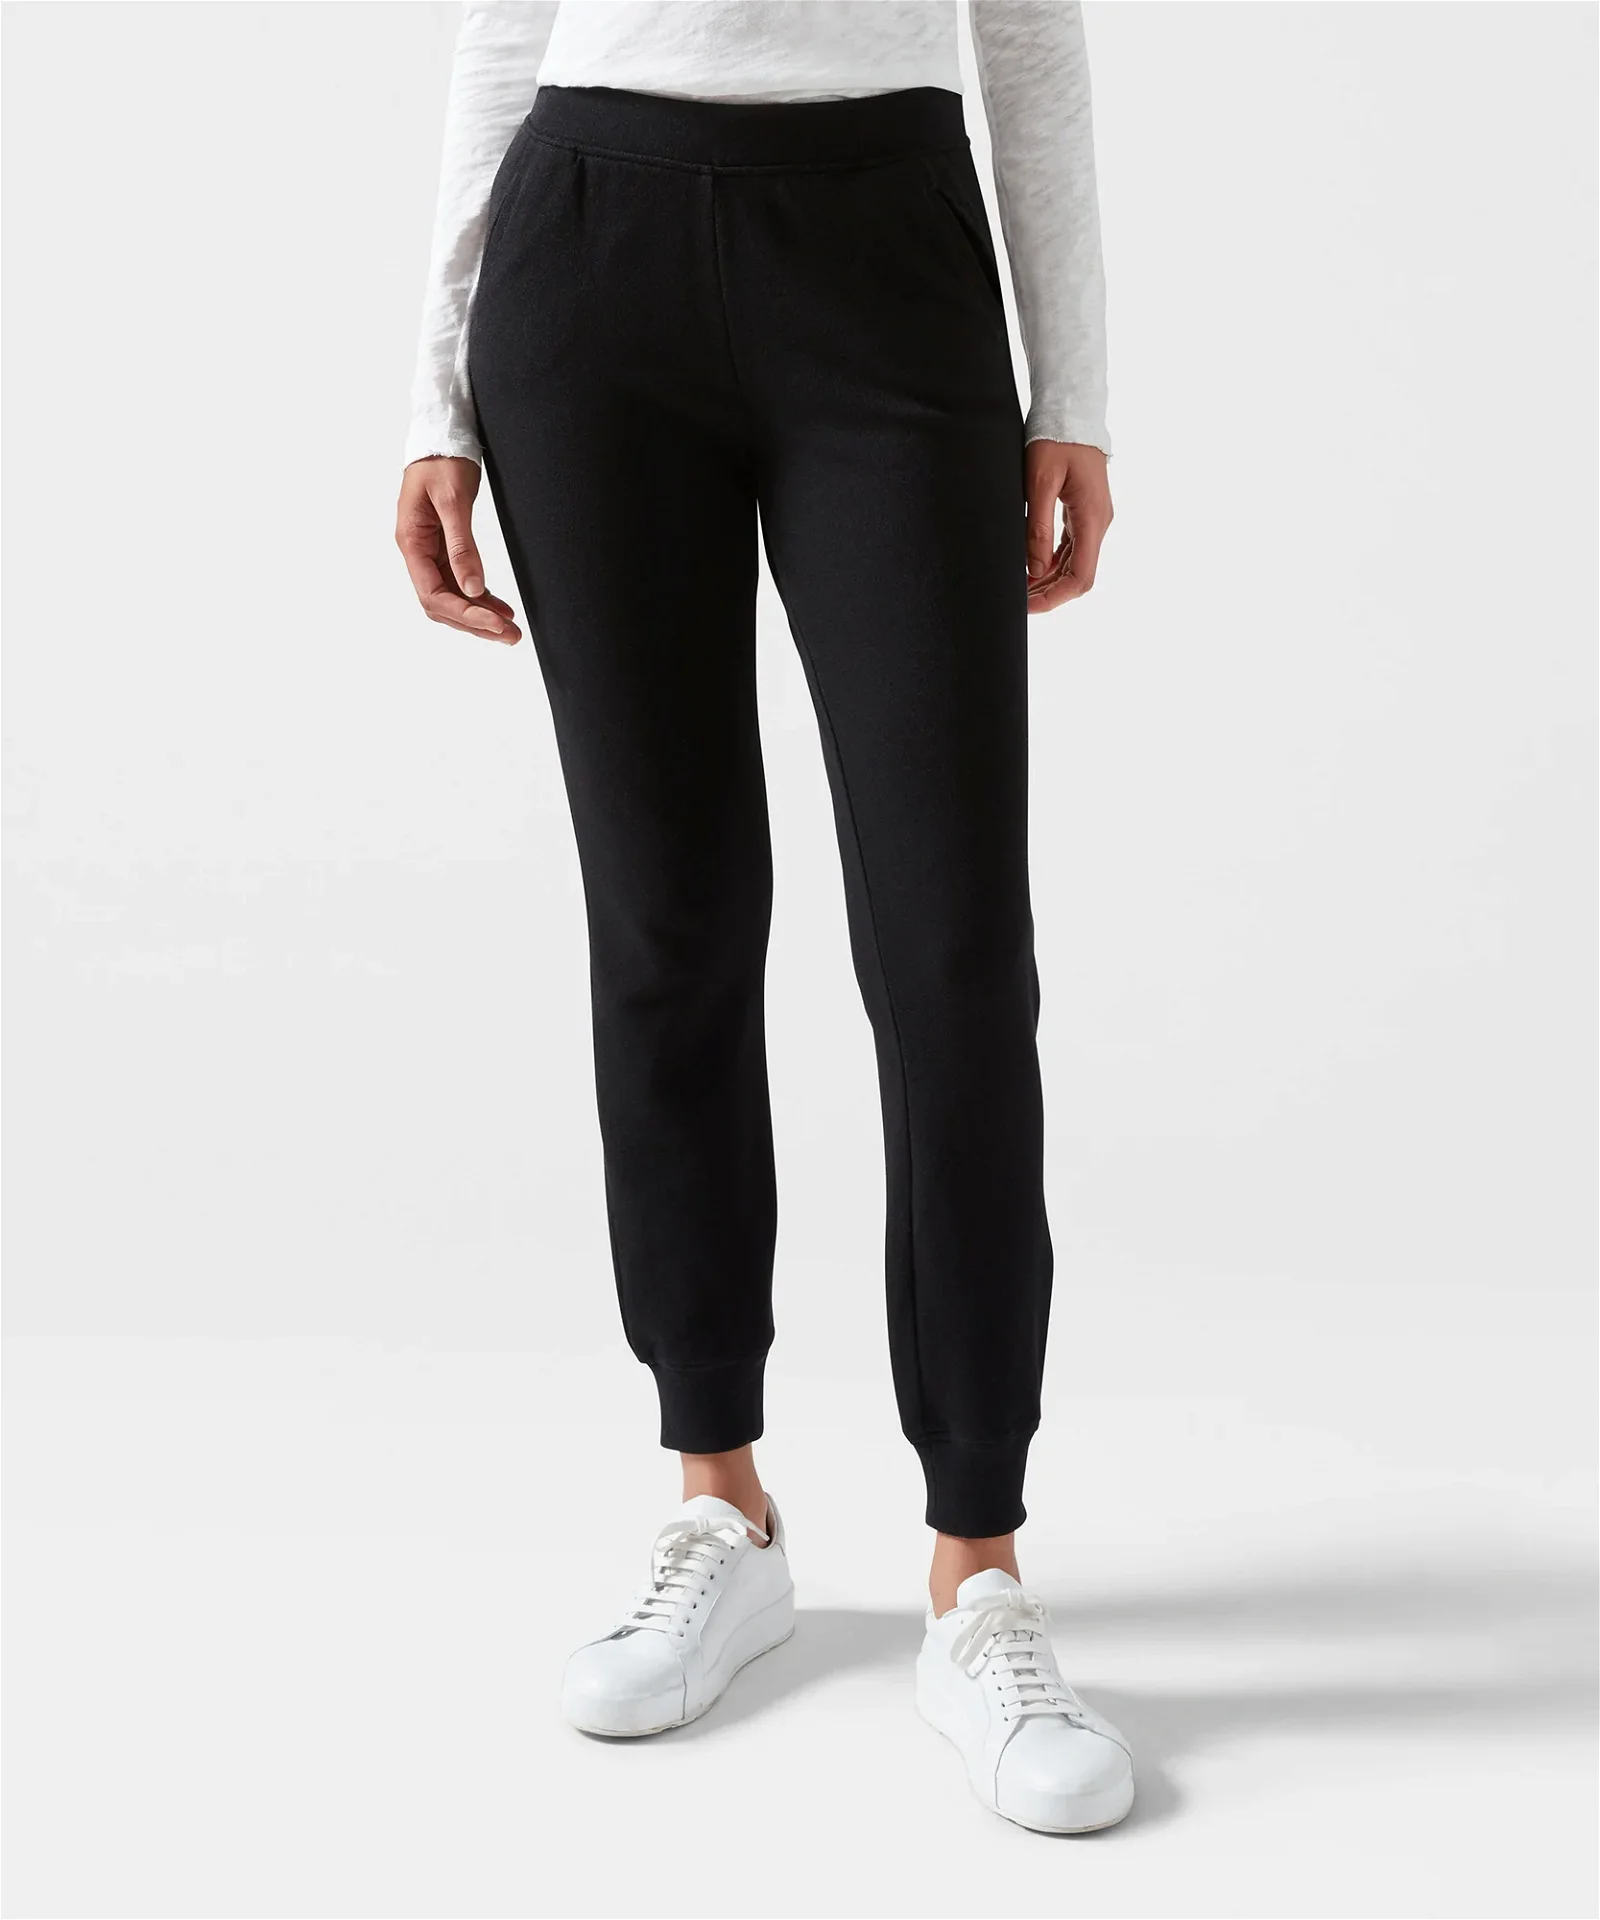 Image of French Terry Sweatpants - Black